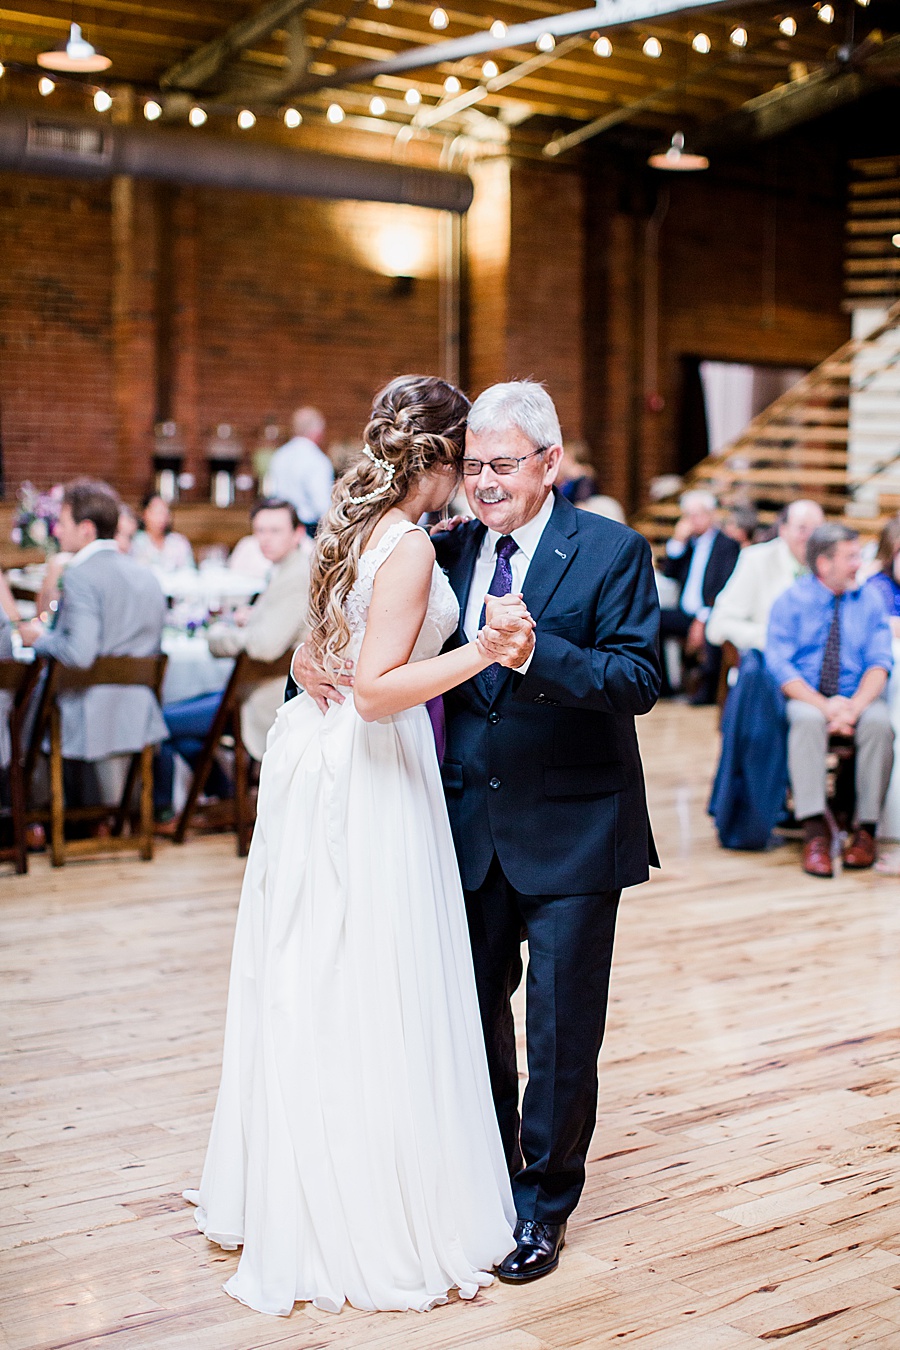 Daddy daughter first dance by Knoxville Photographer, Amanda May Photos.